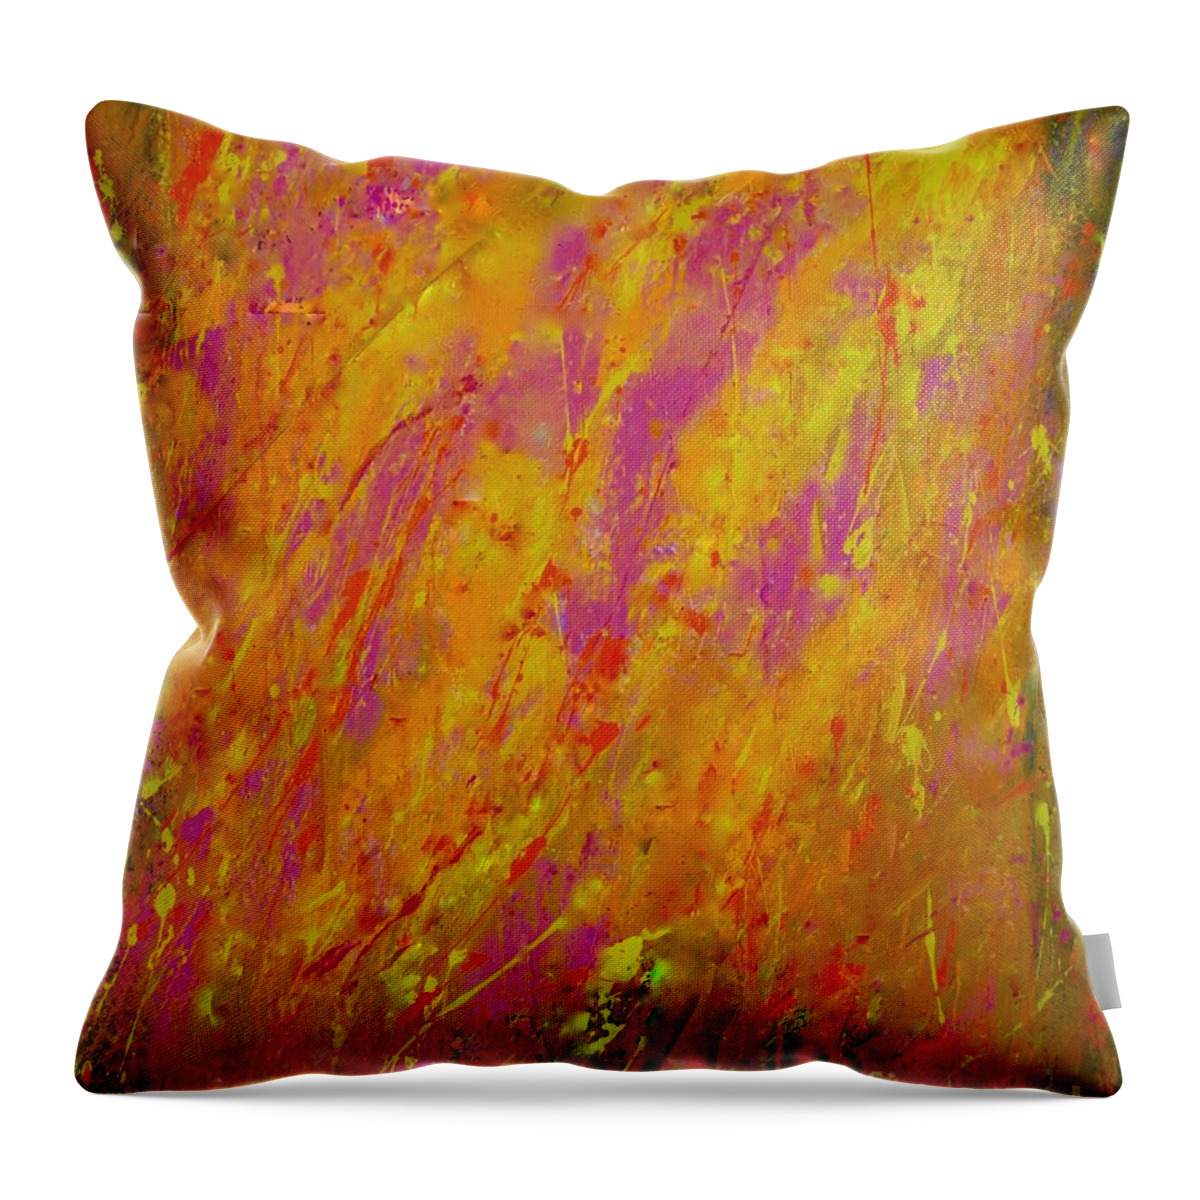 A Throw Pillow featuring the painting Rumba by Catalina Walker